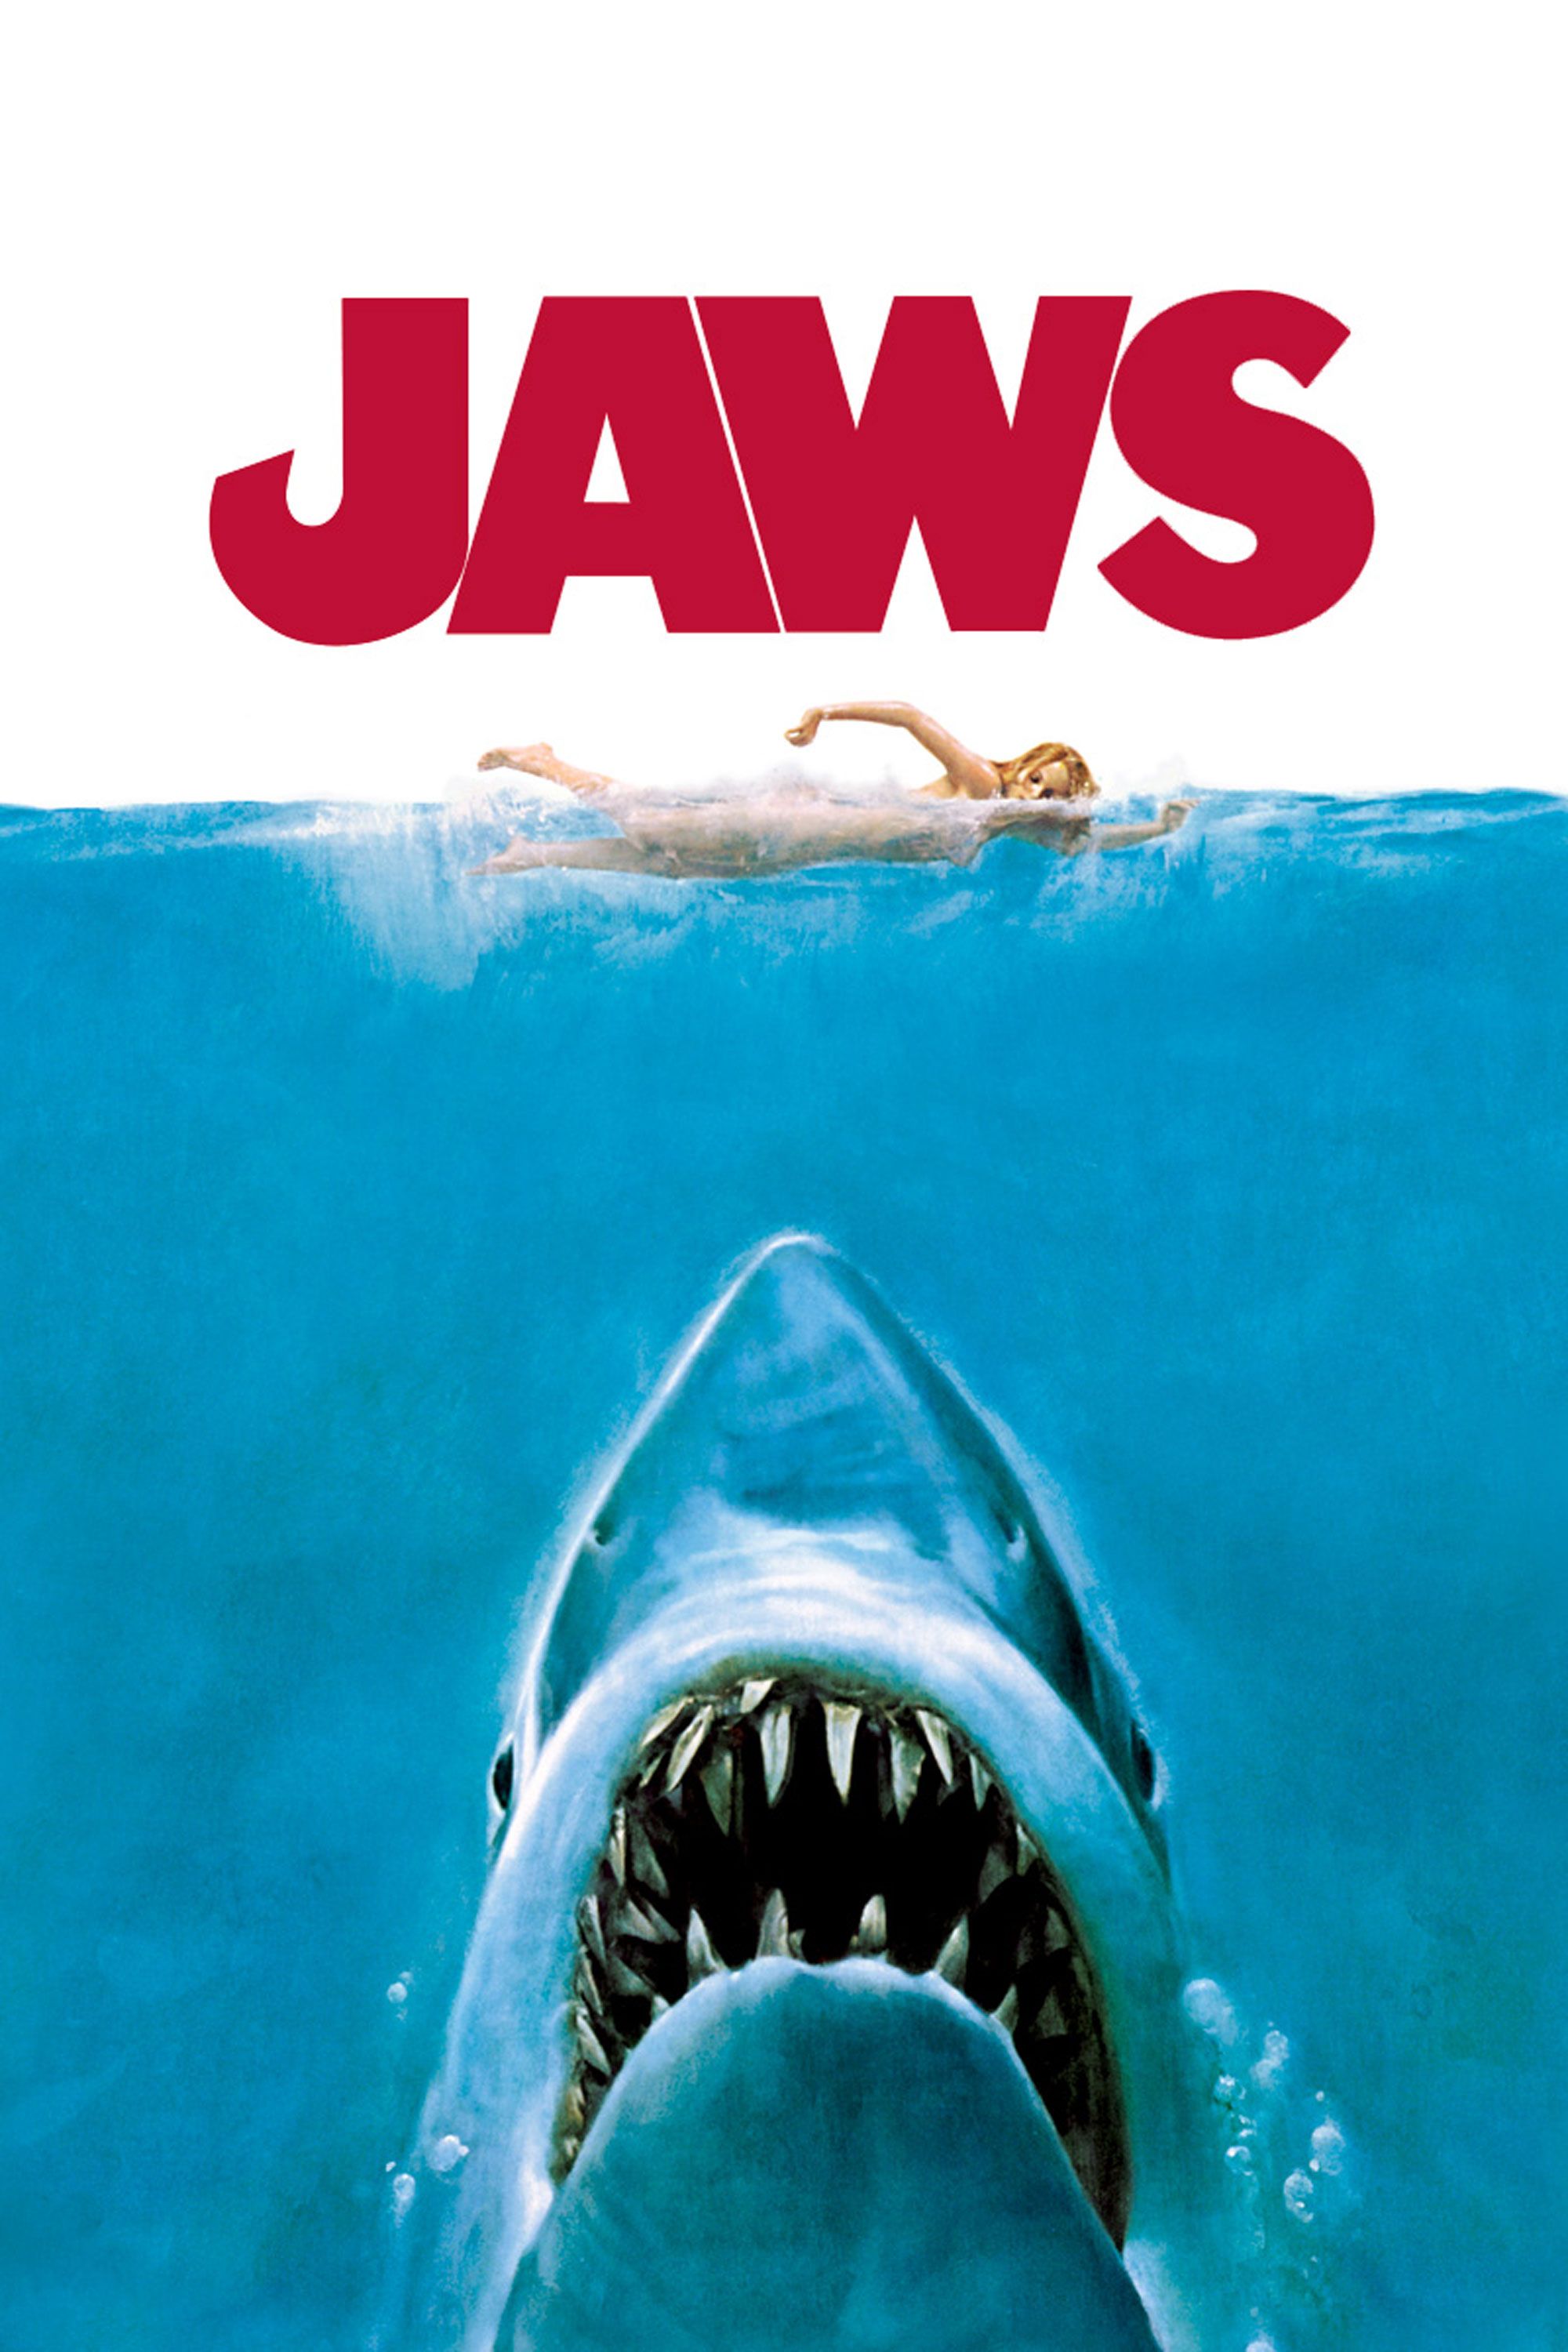 Jaws poster